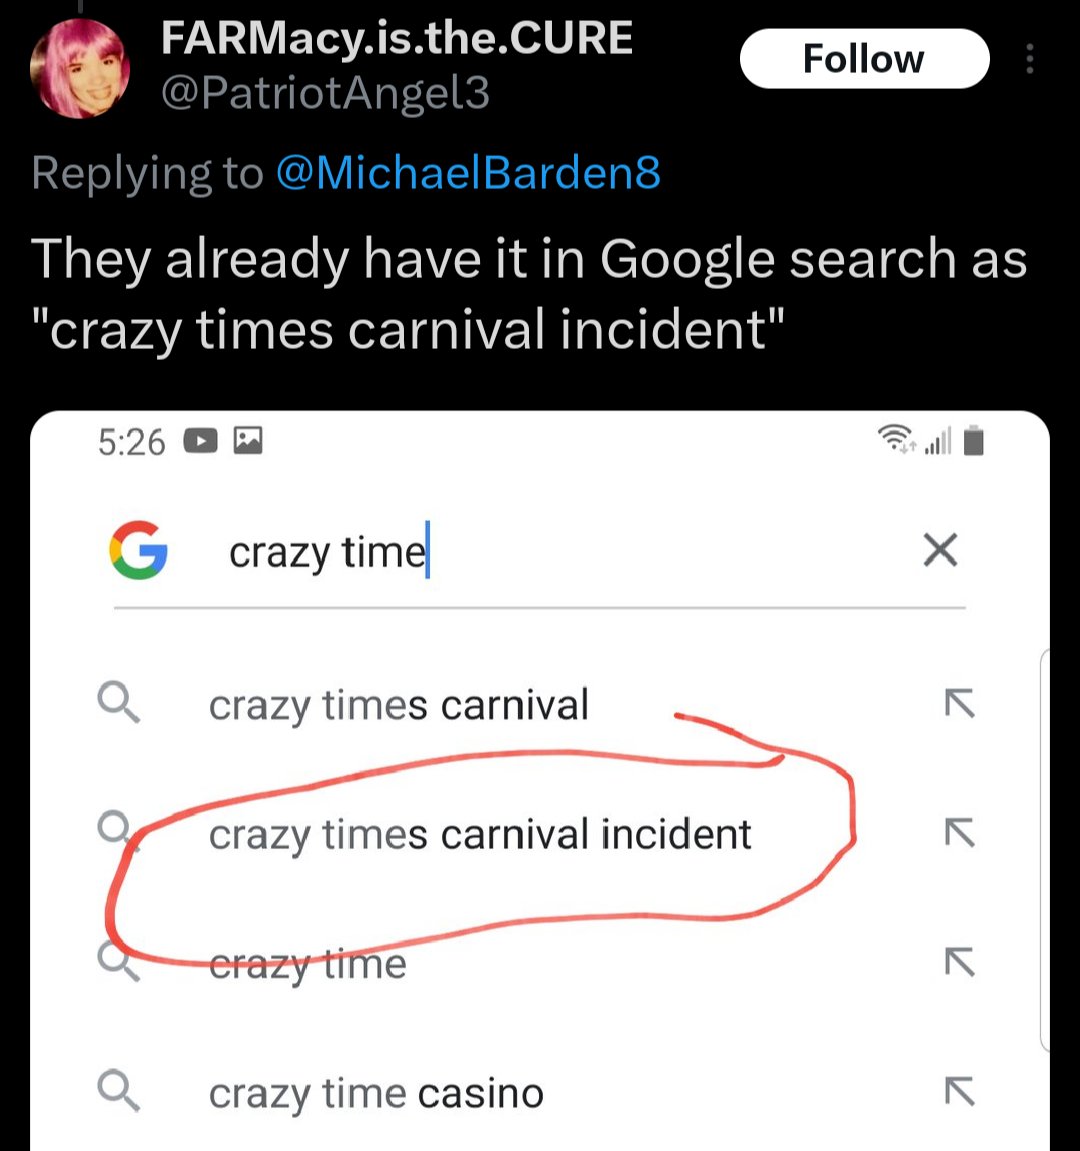 @QOrigins oh my god, i totally forgot about that until now, they were all Google searching 'crazy times carnival incident' so it became a search query suggestion bc so many of them used those terms together and then they pointed to that as evidence it was a planned false flag lmao